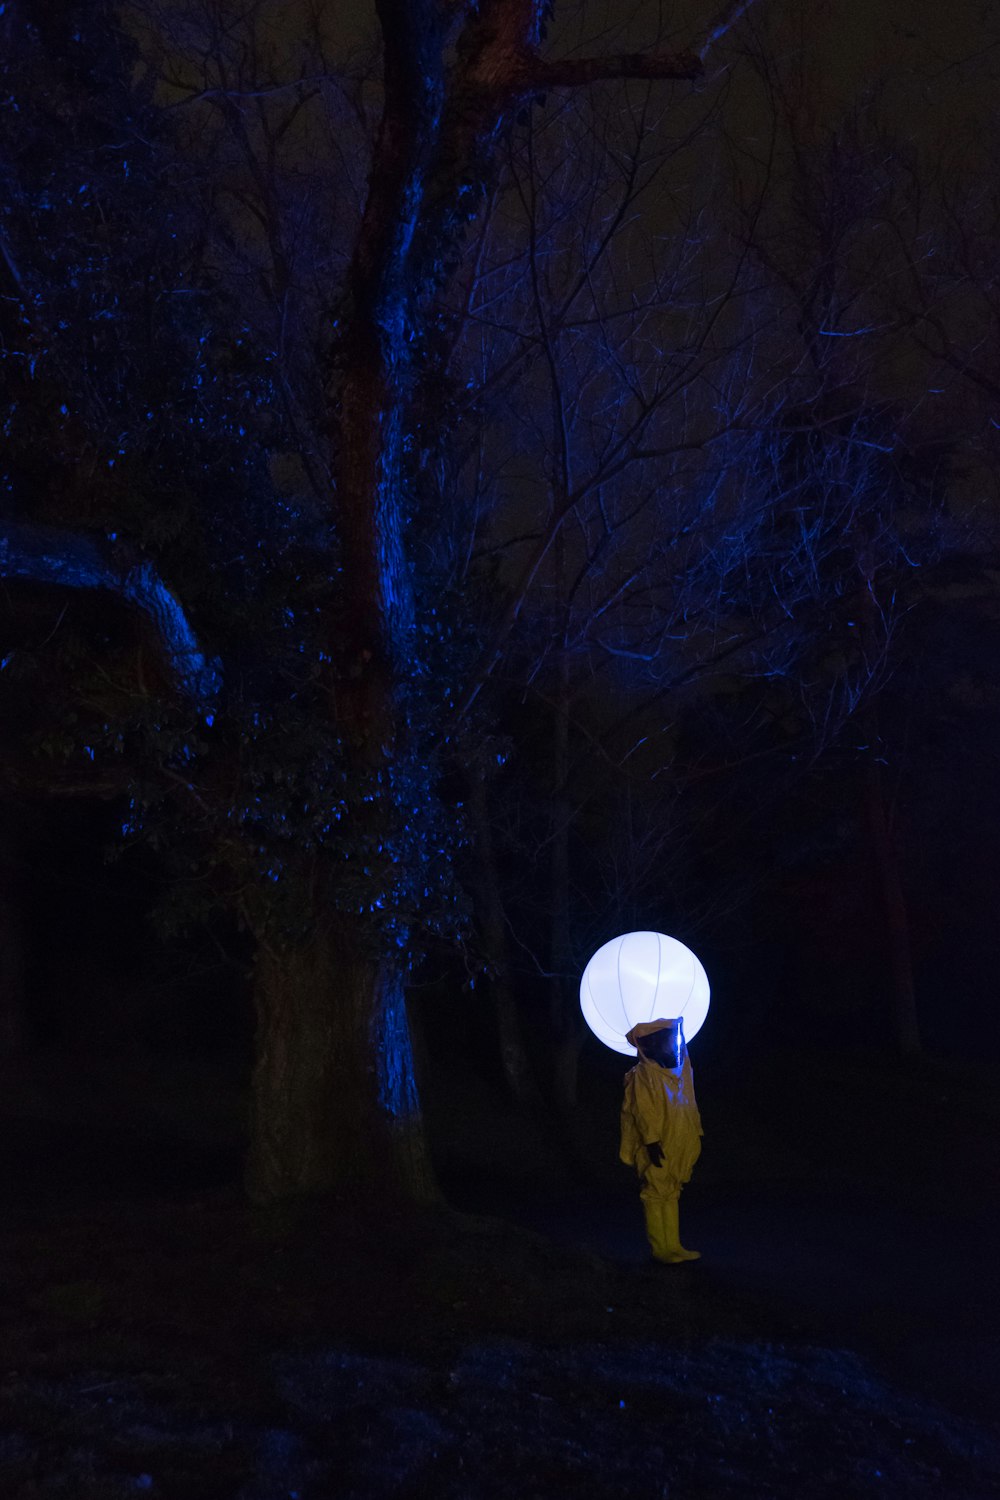 person in white outfit standing under leafless tree at nighttime